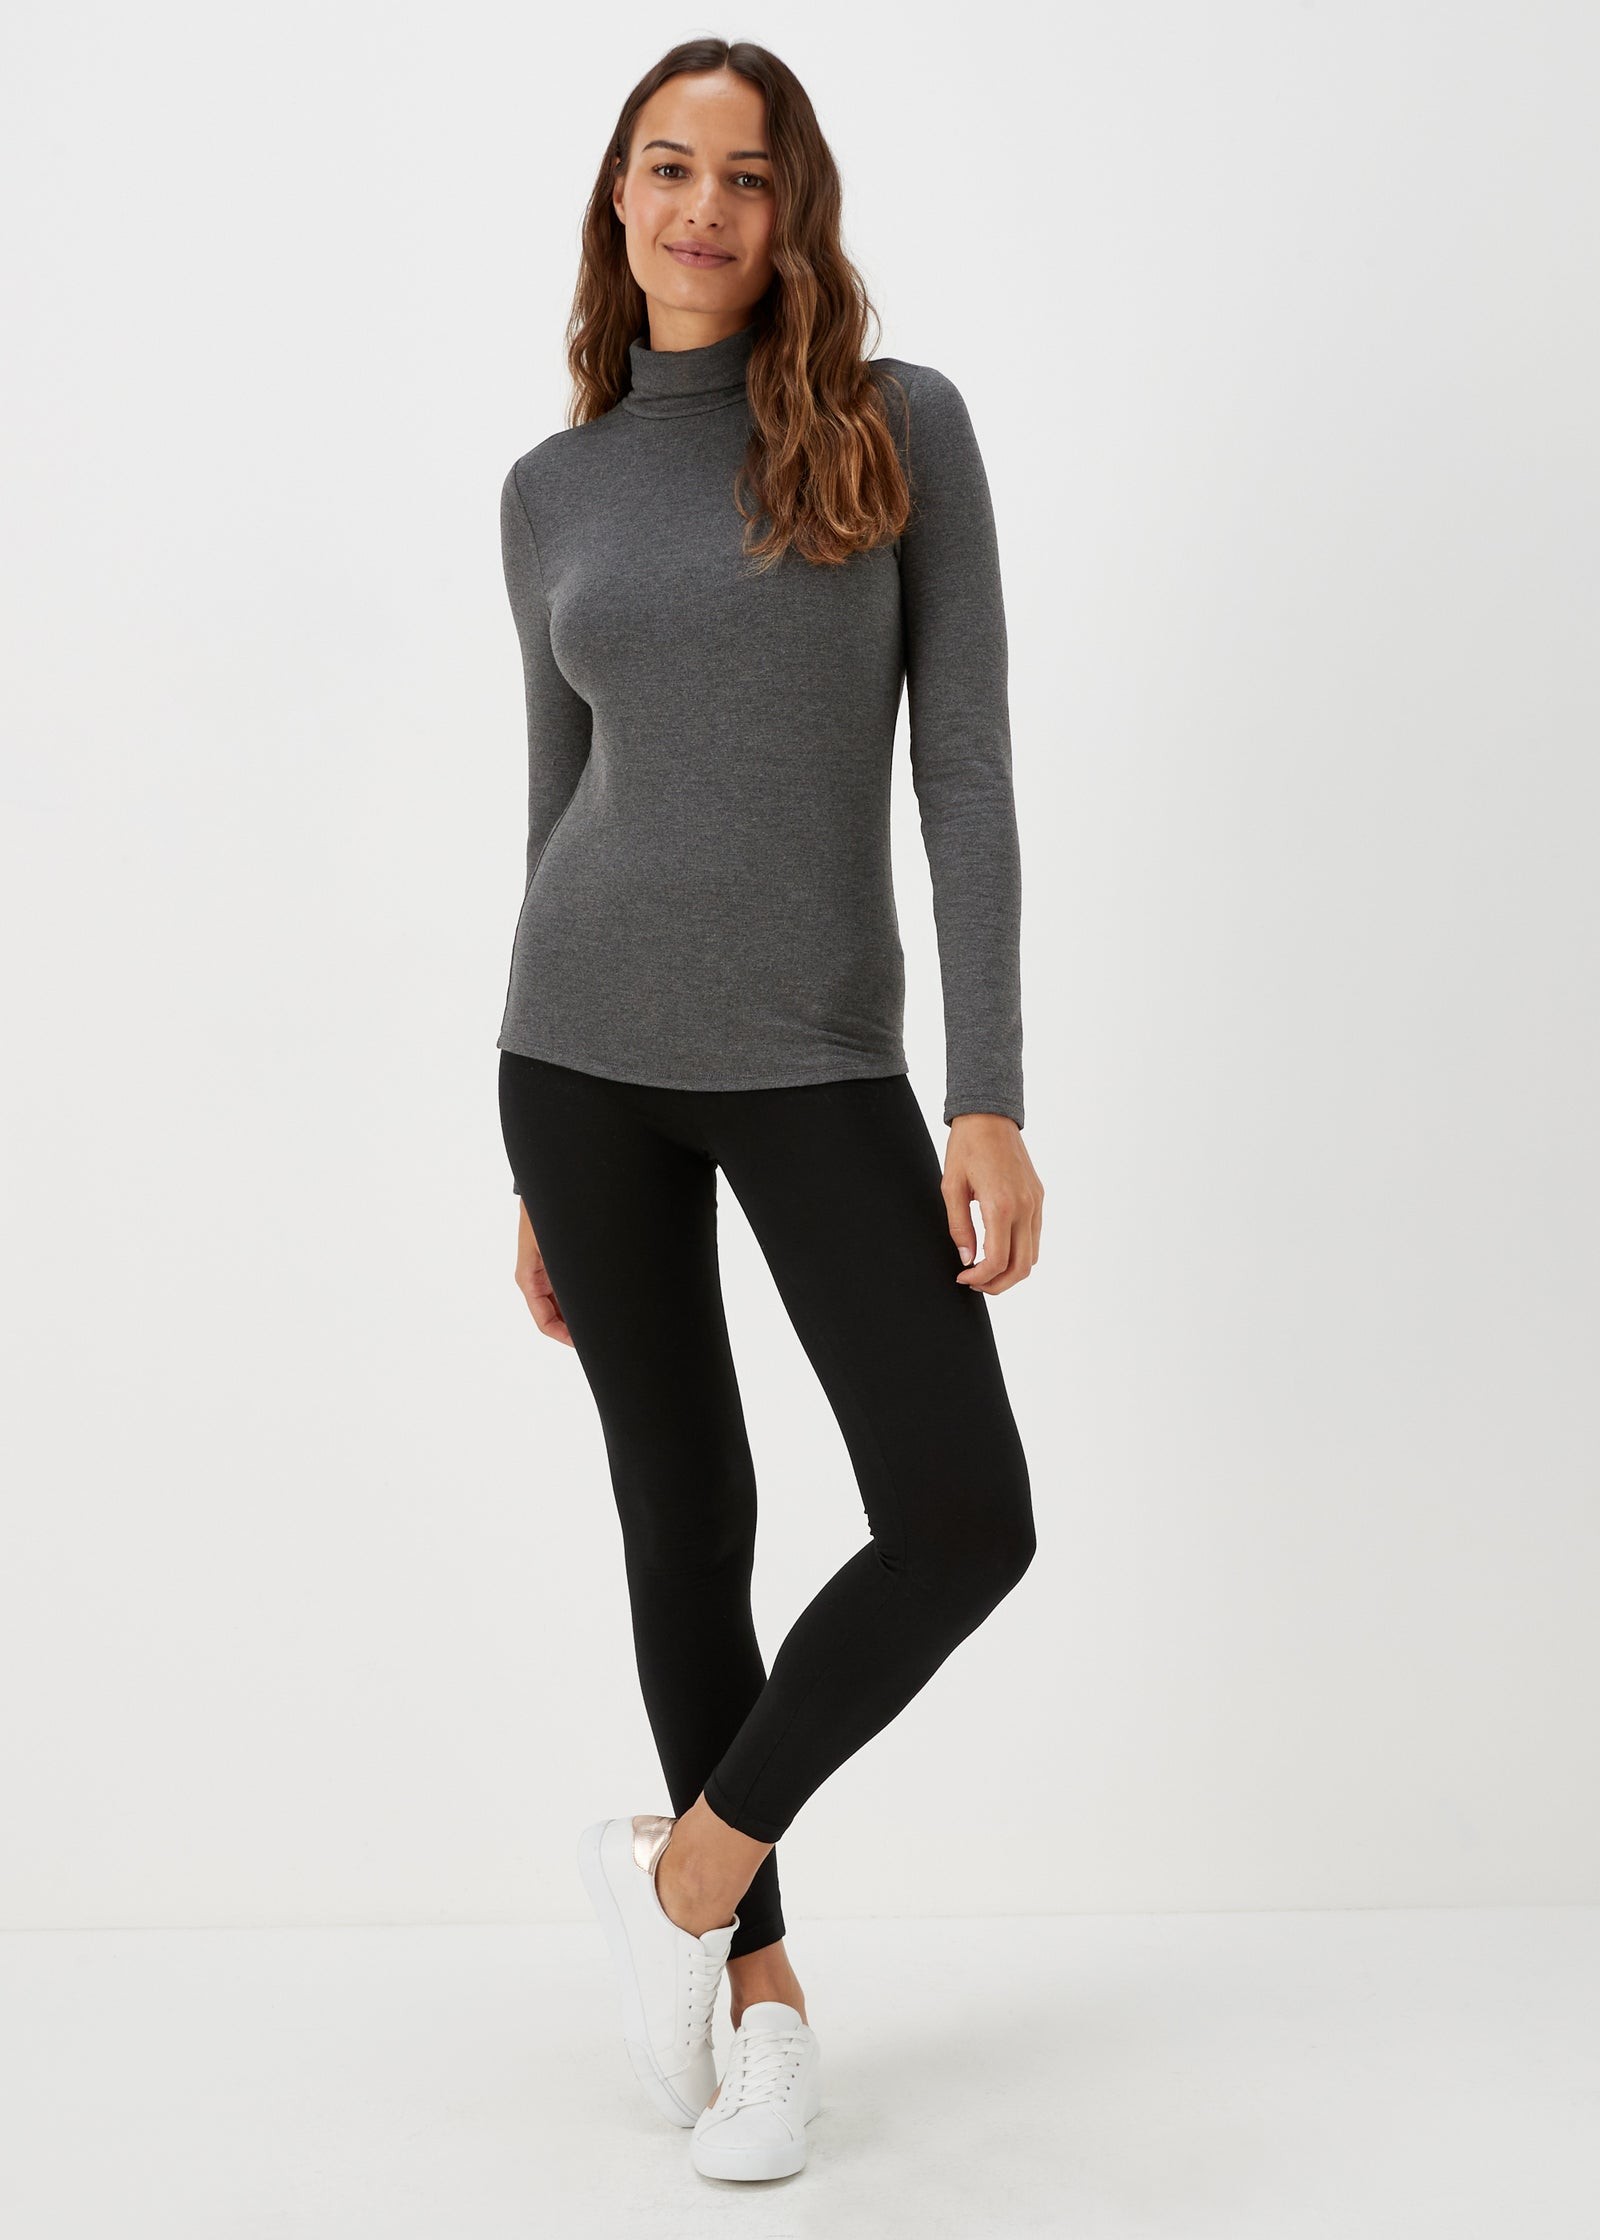 Buy Thermal Polo Neck Top Online in Oman from Matalan